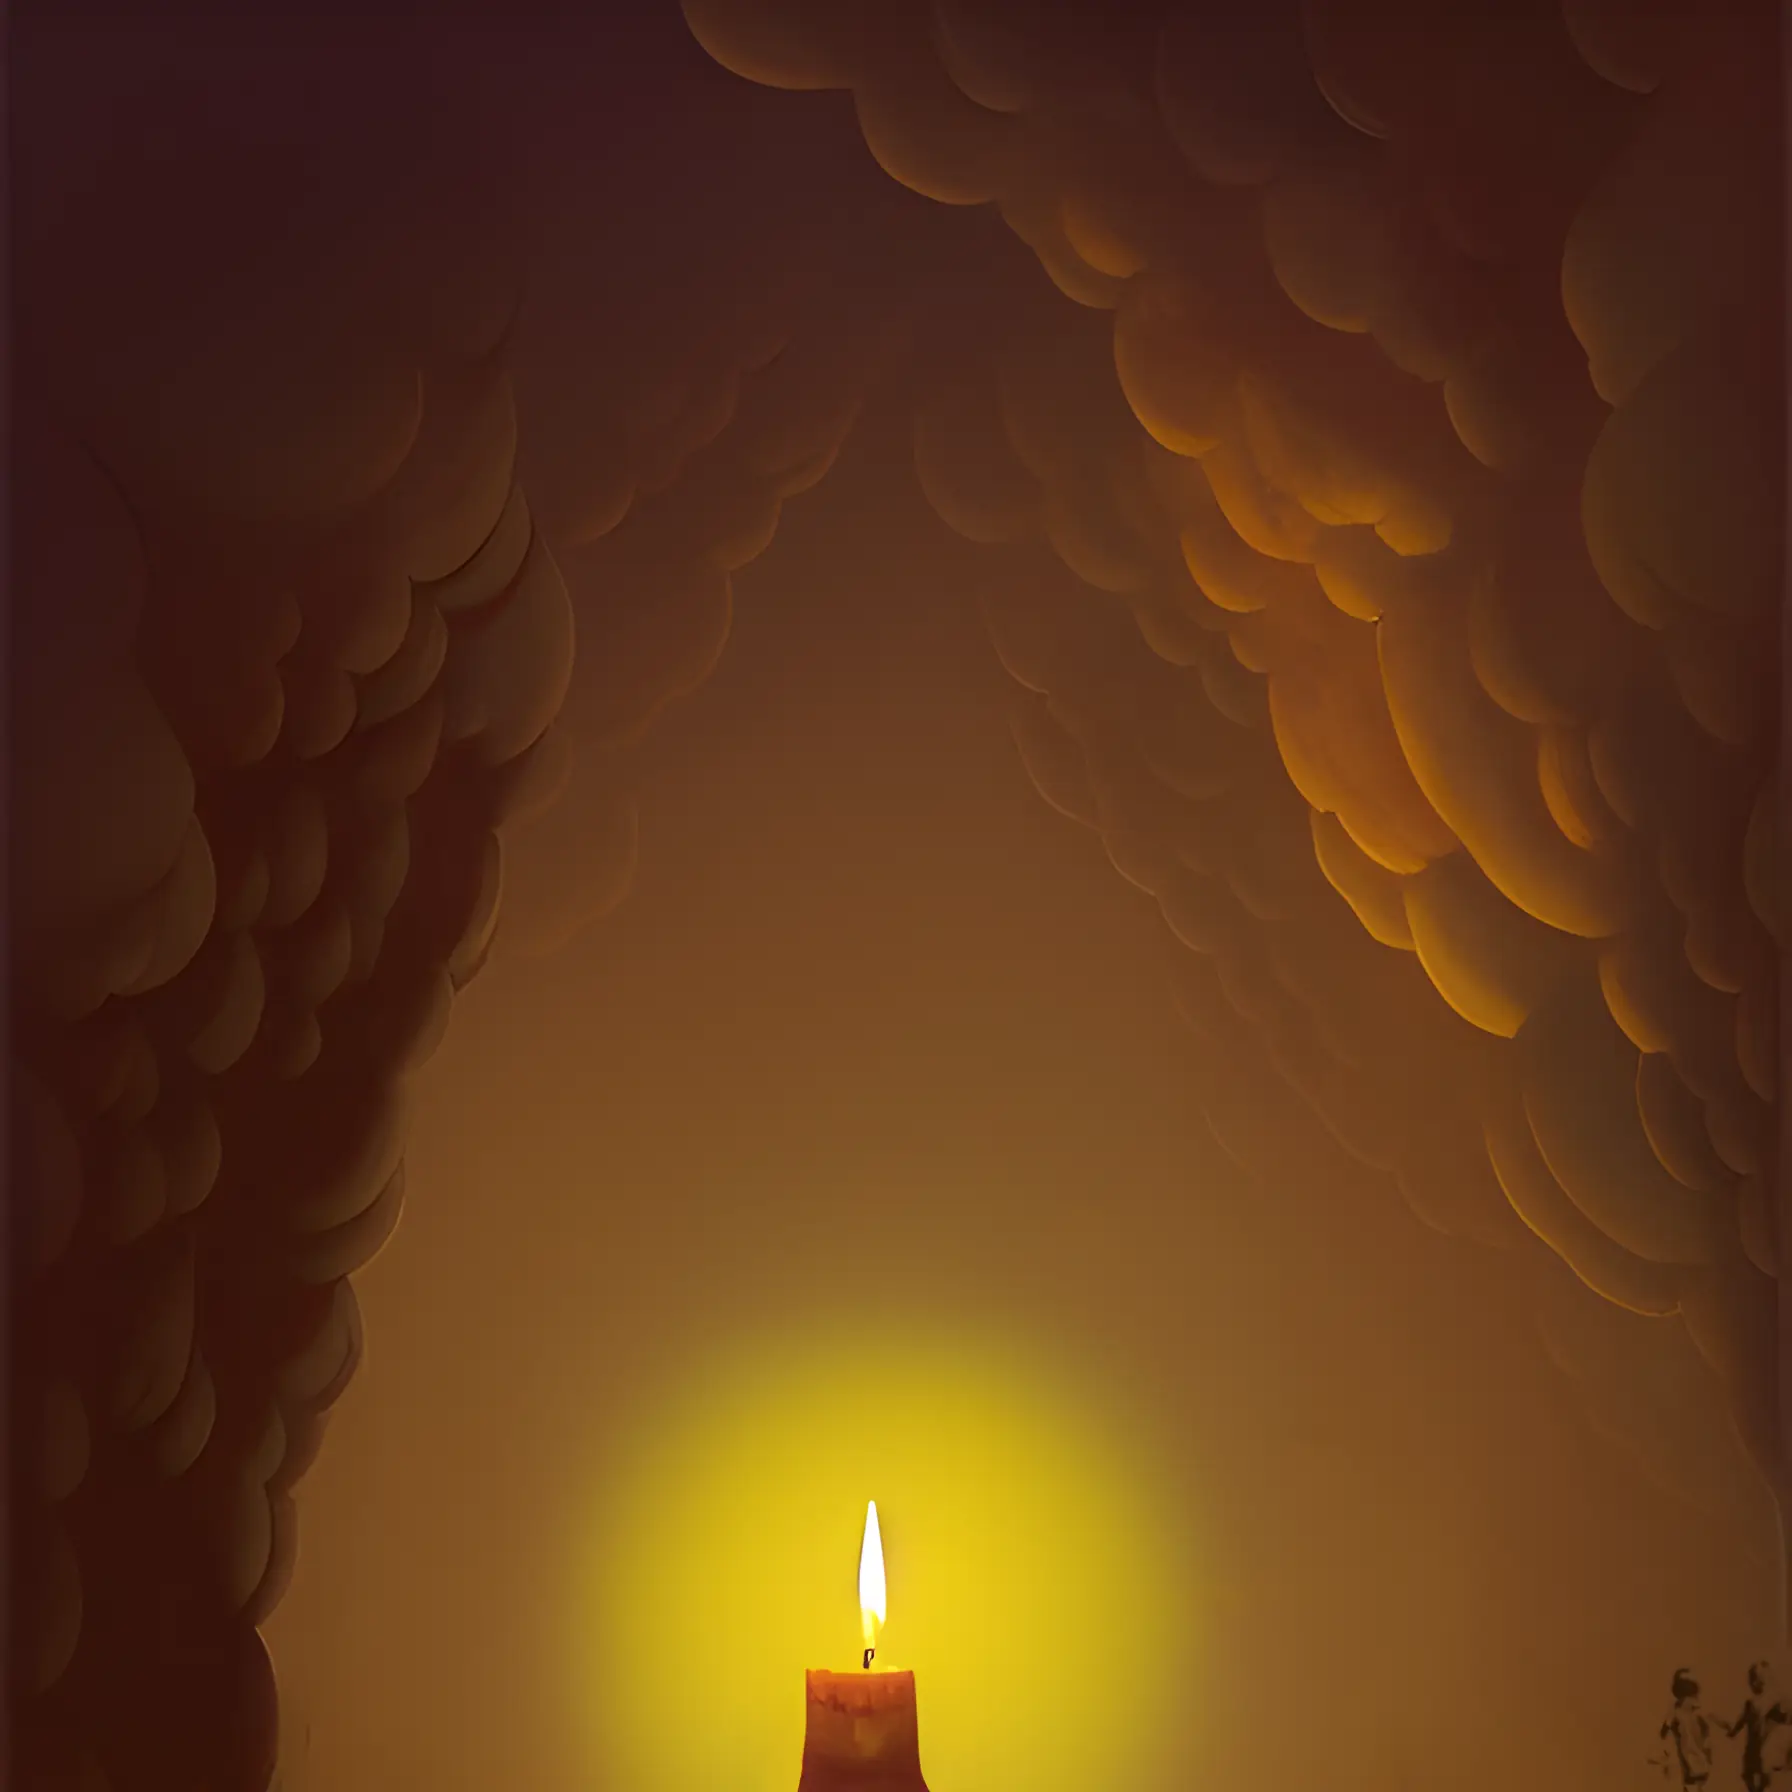 A small candle burns brightly in the bottom center of a cave.